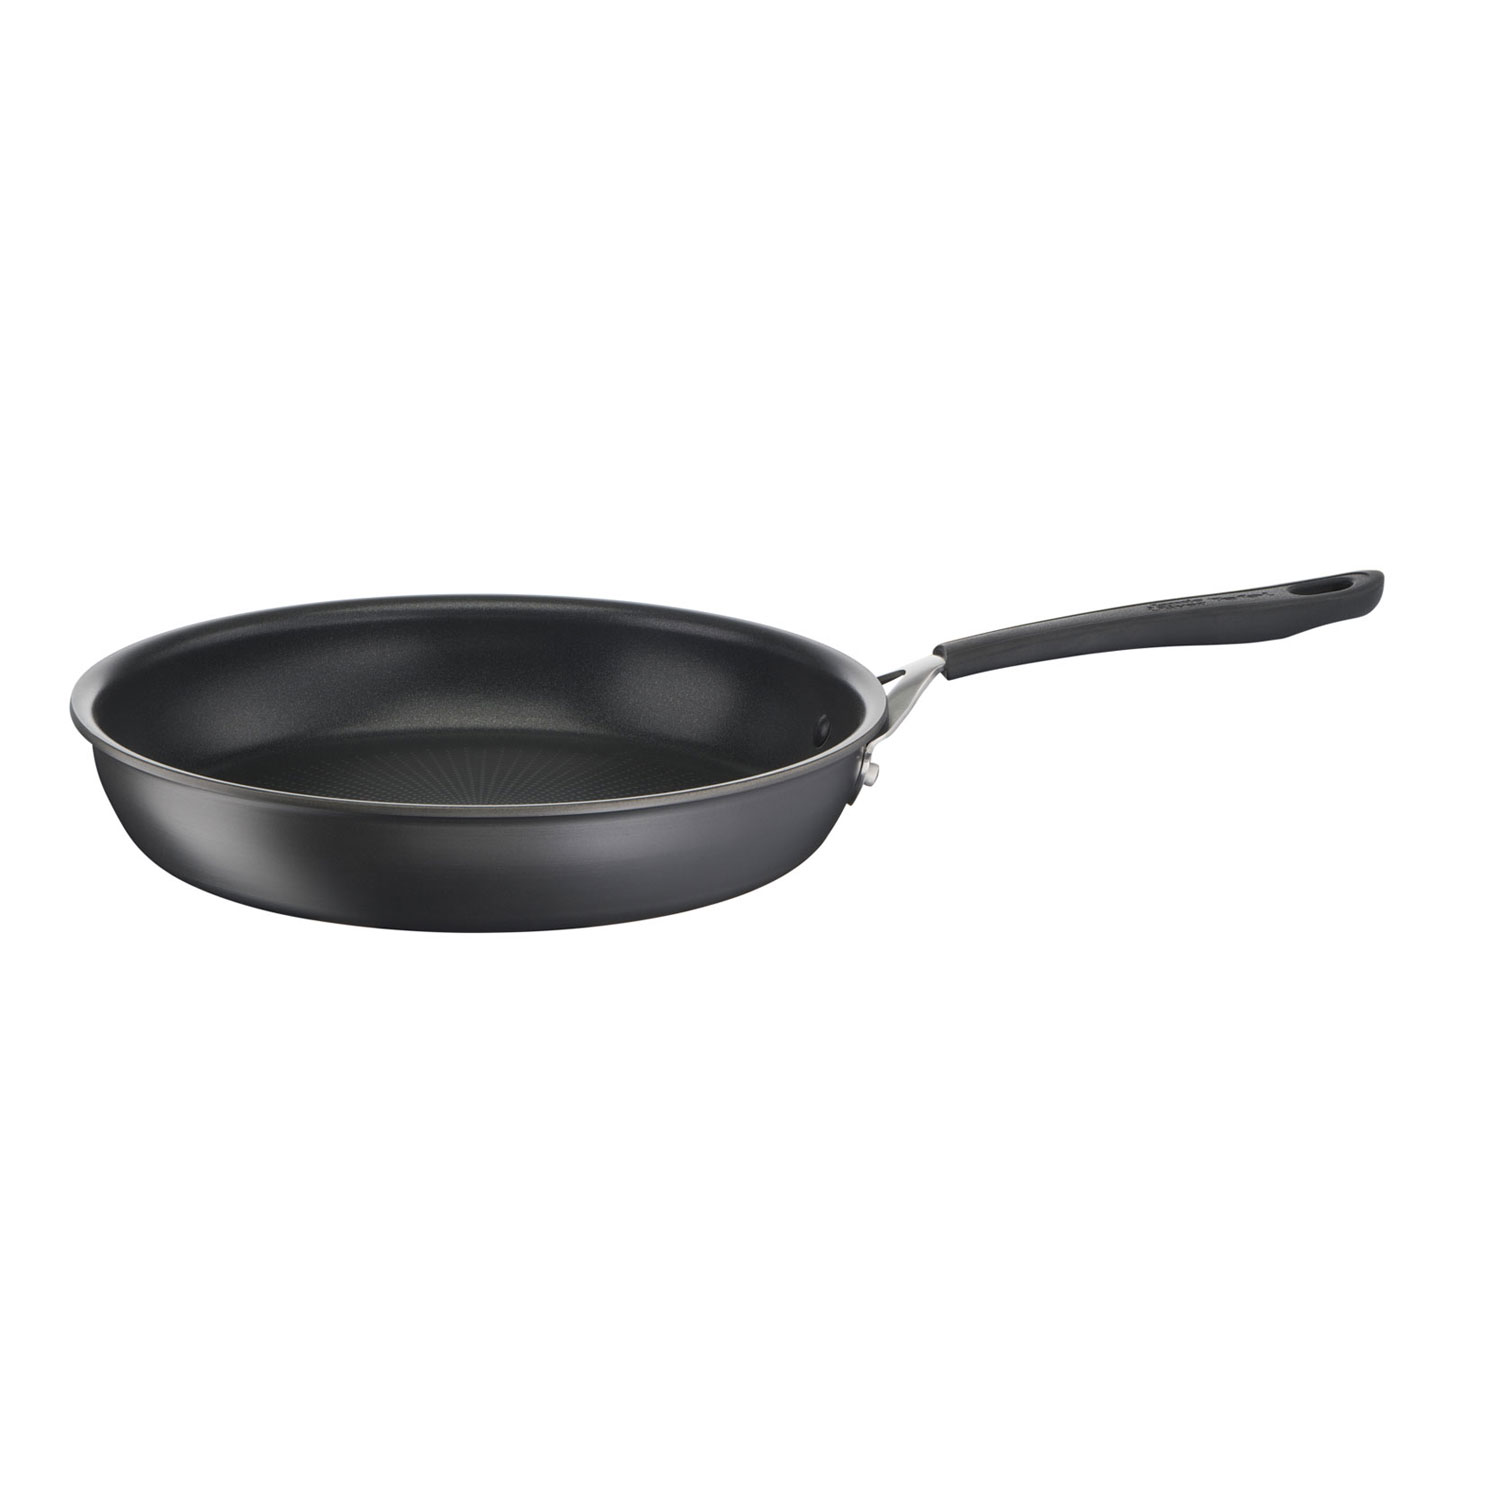 Jamie Oliver Quick & Easy Hard Anodized Frypan, 11 inch by T-Fal